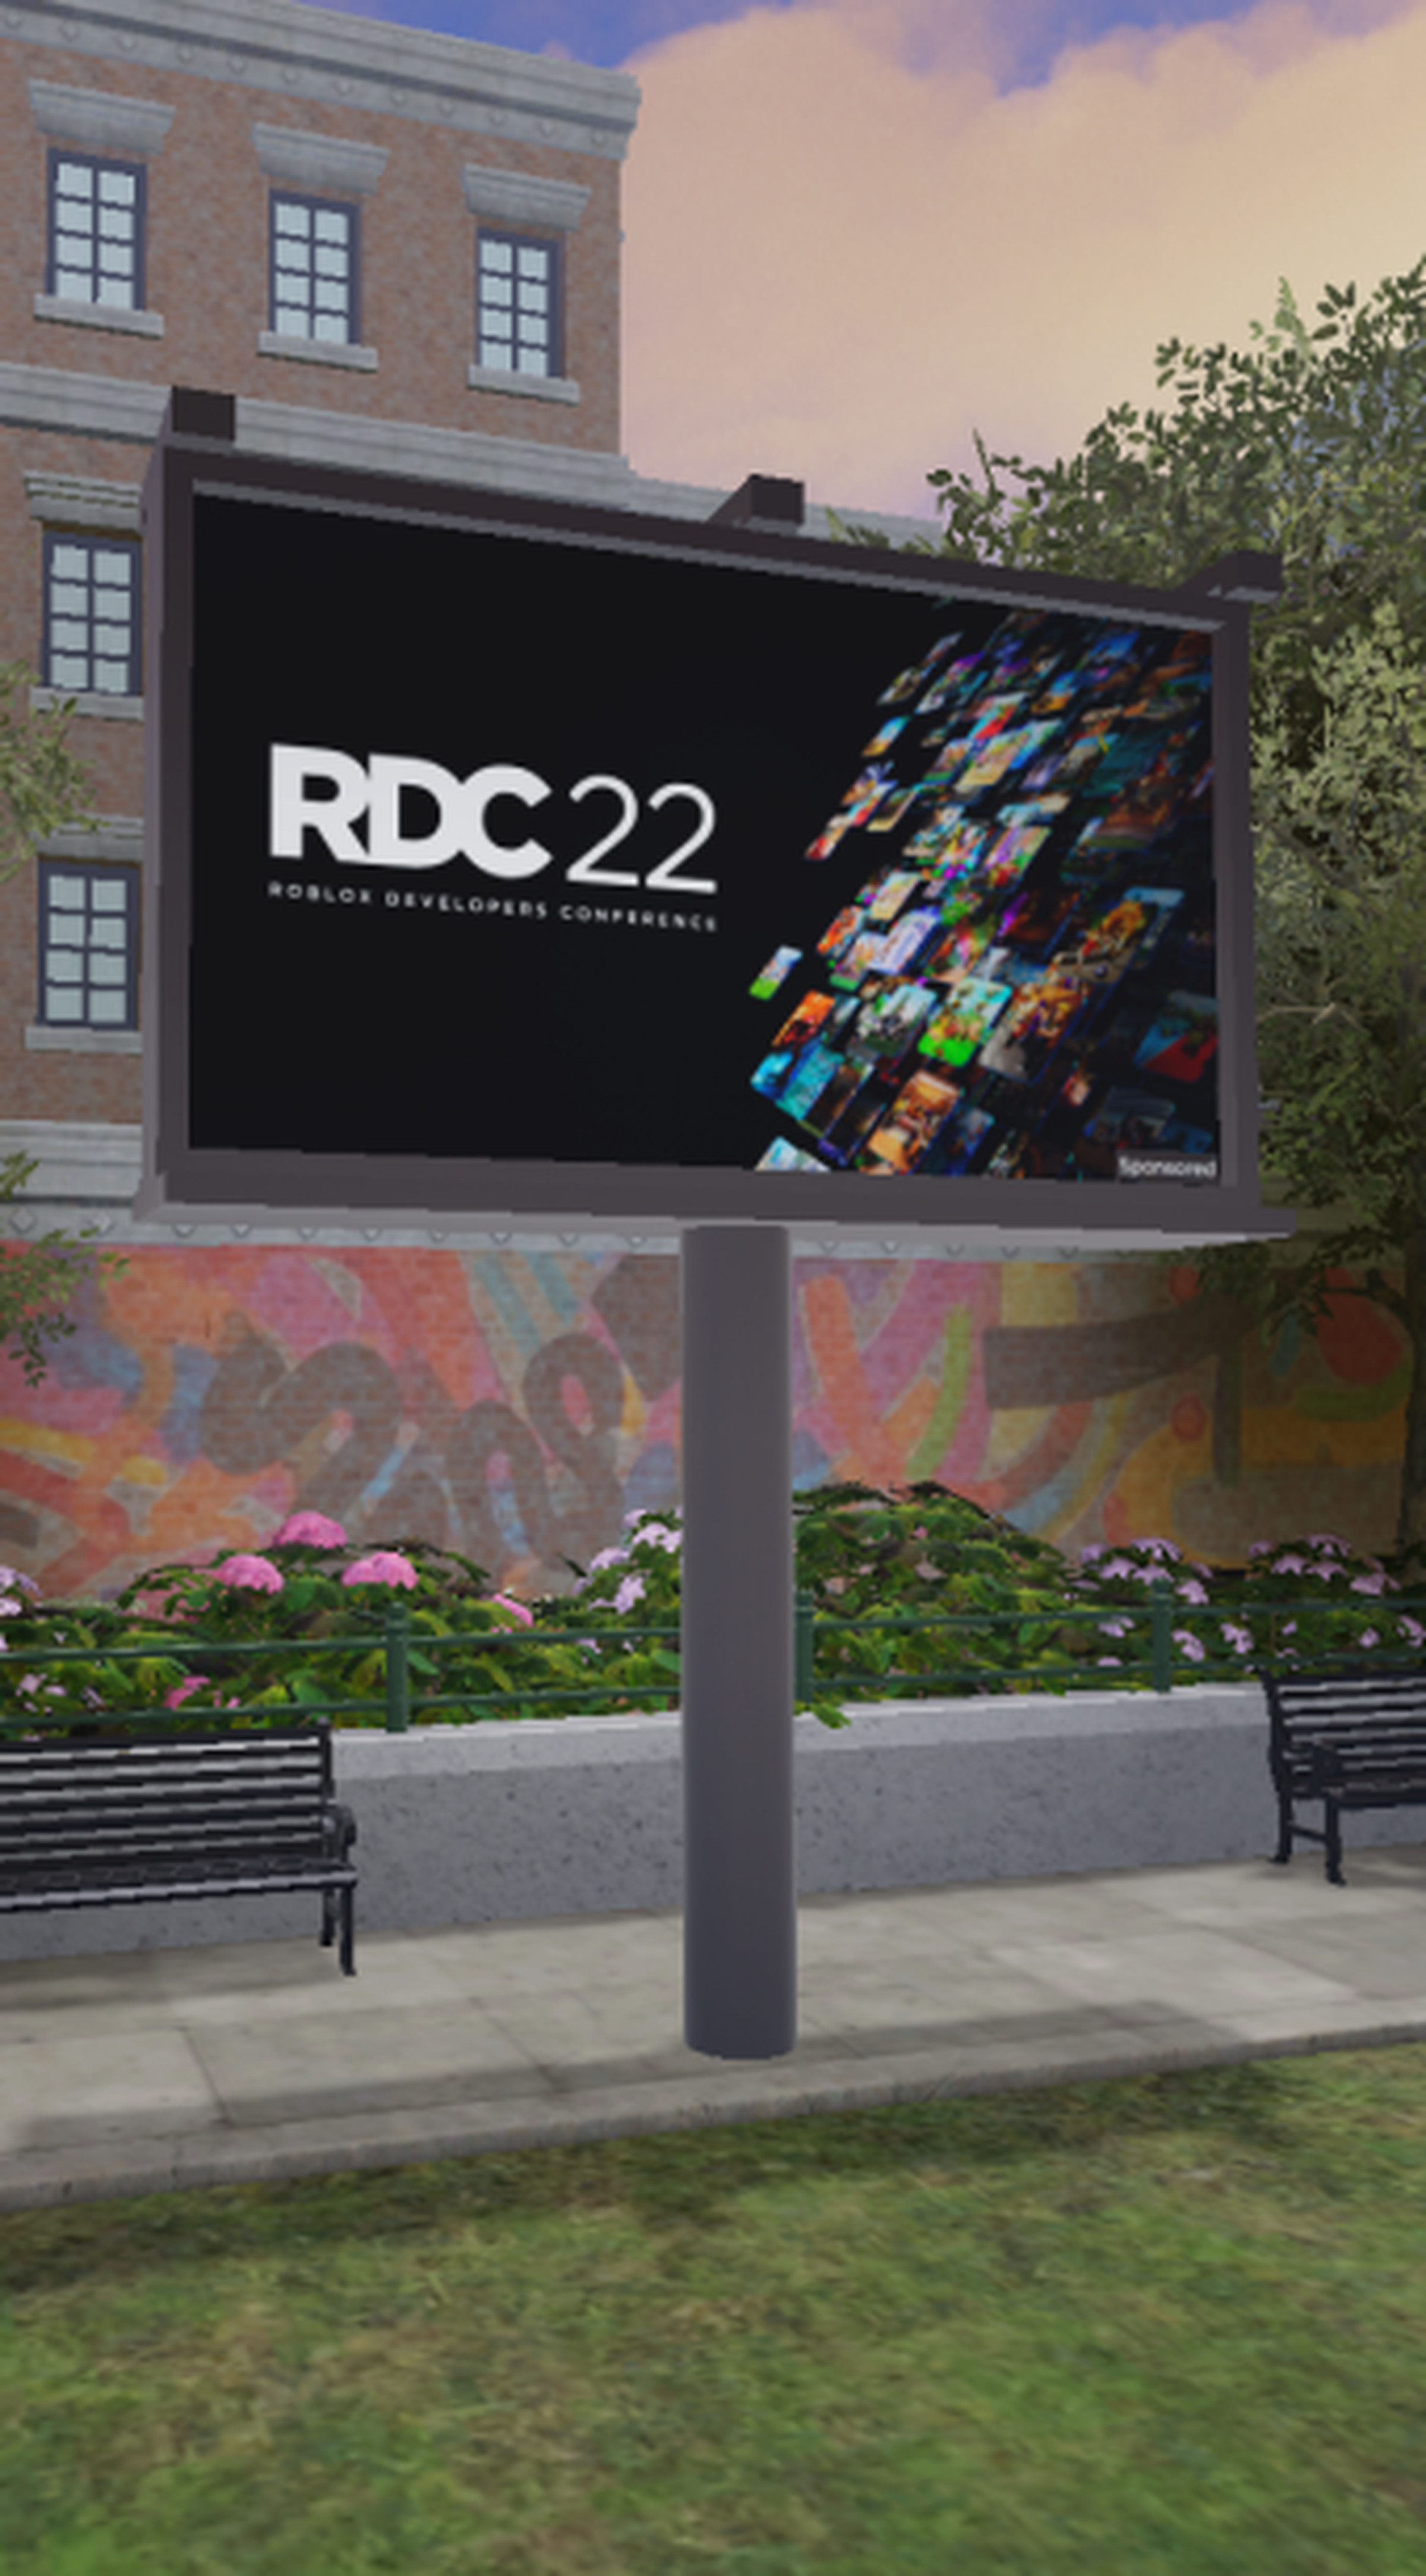 A standing billboard in Roblox is shown with an RDC 22 image on it.